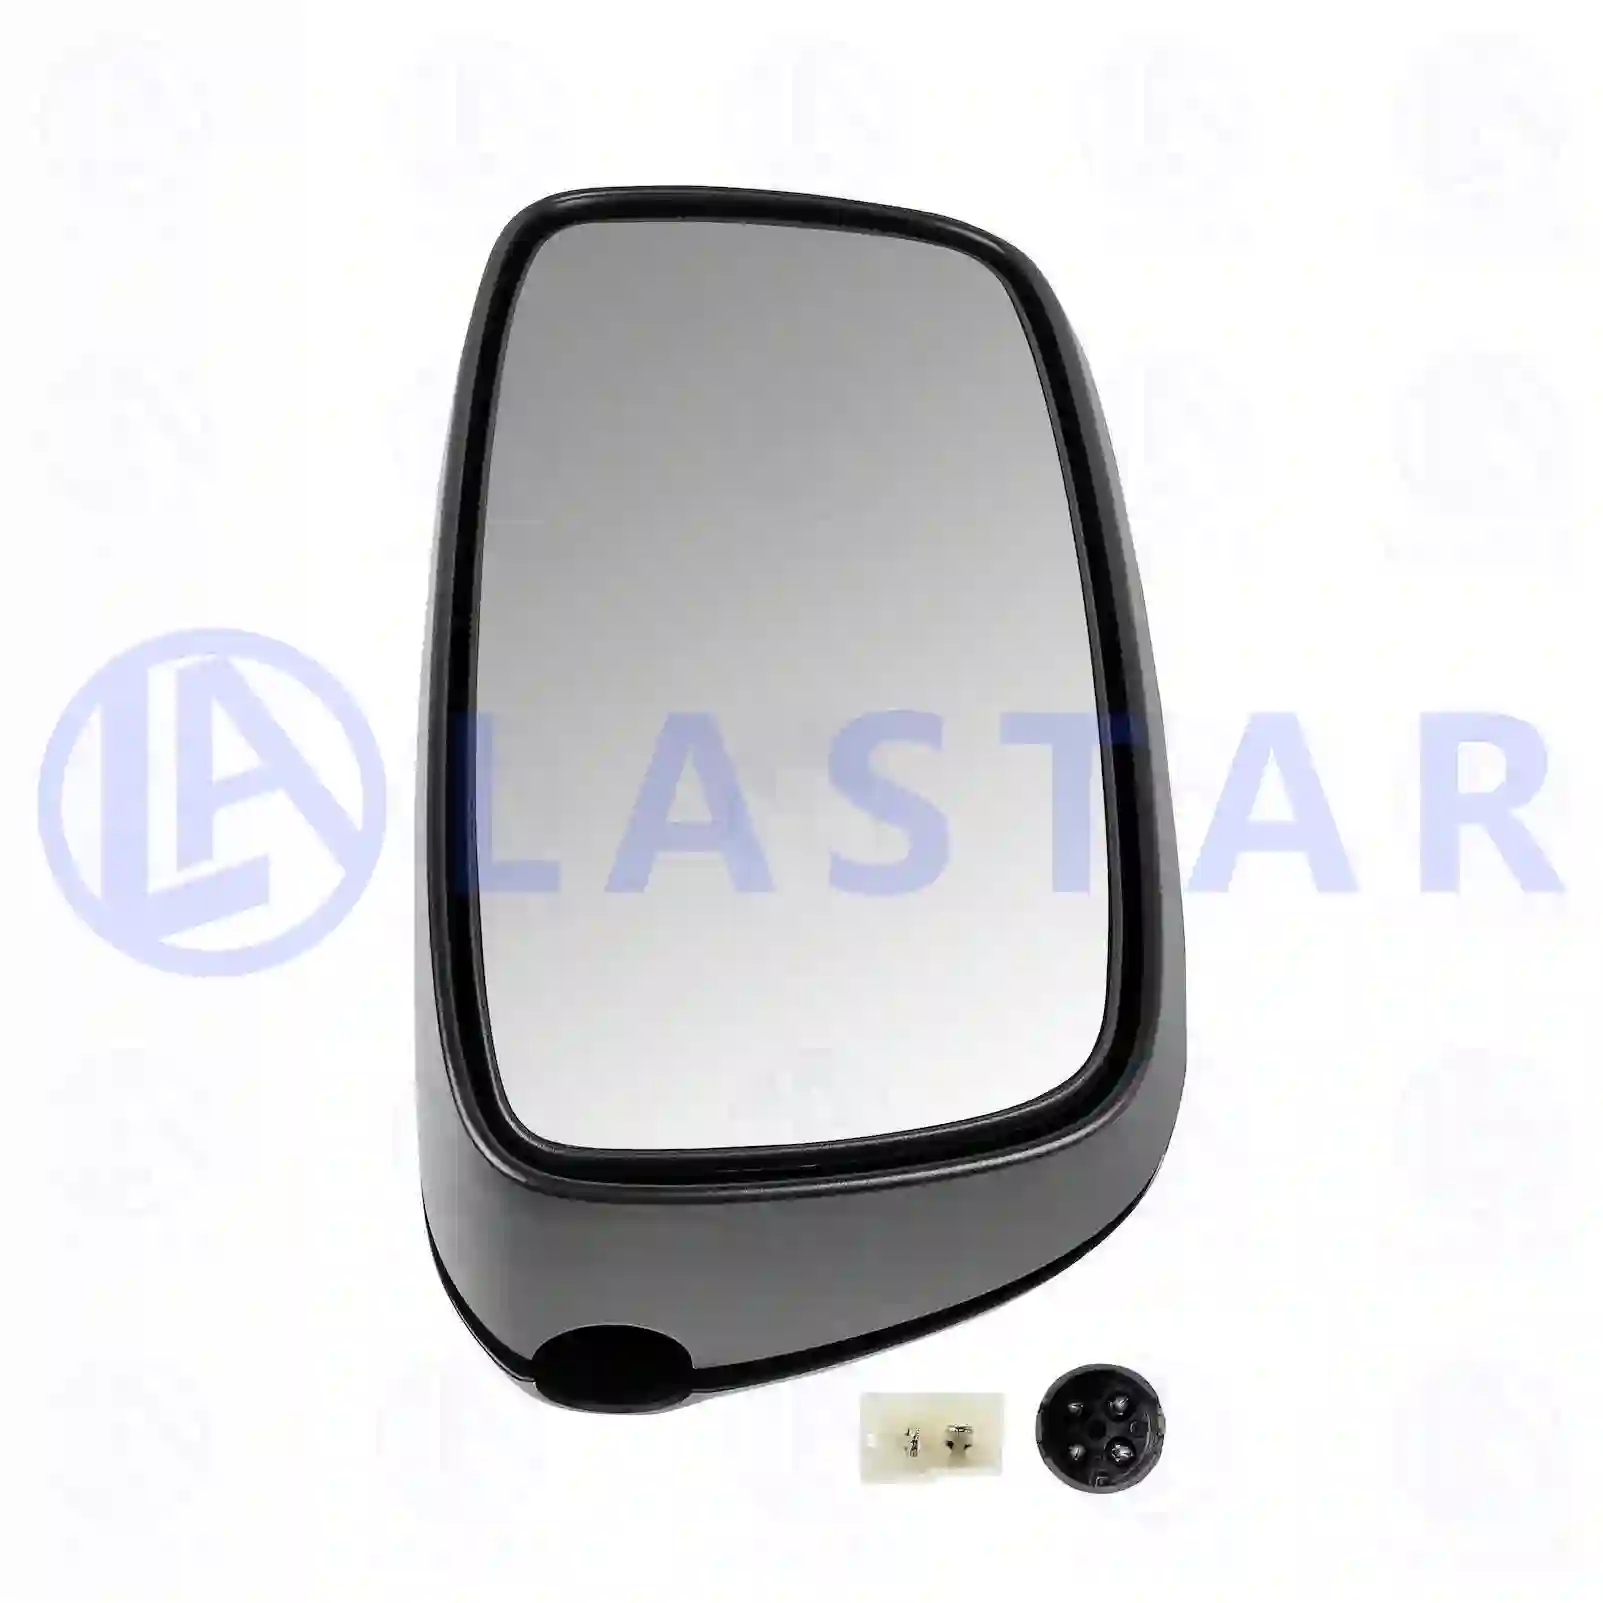 Main mirror, heated, electrical, 77719958, 1689348 ||  77719958 Lastar Spare Part | Truck Spare Parts, Auotomotive Spare Parts Main mirror, heated, electrical, 77719958, 1689348 ||  77719958 Lastar Spare Part | Truck Spare Parts, Auotomotive Spare Parts